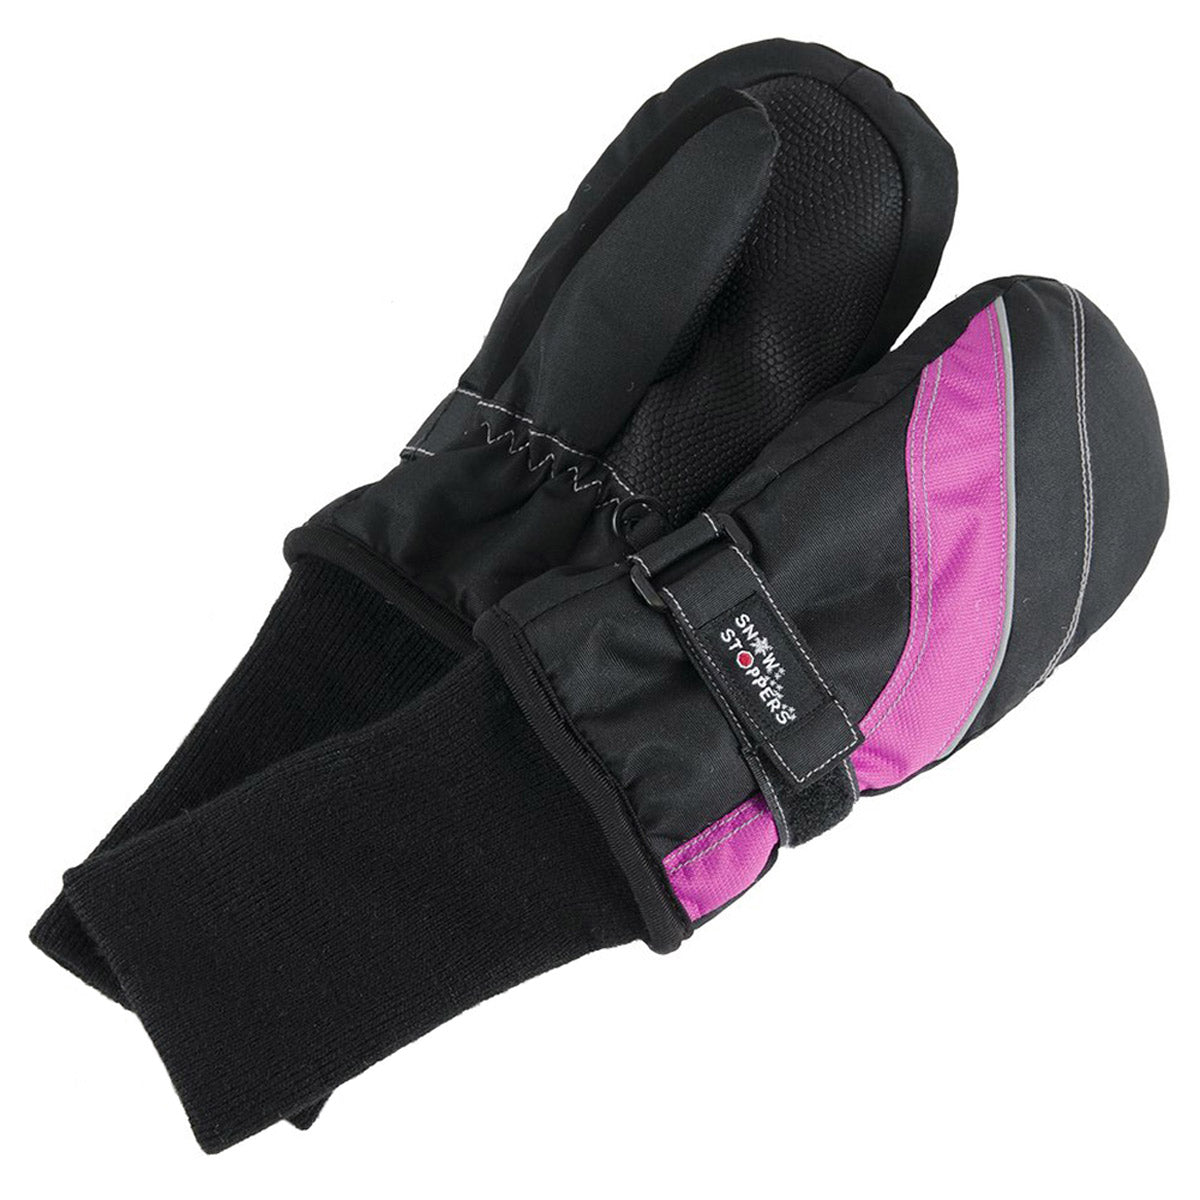 A pair of waterproof black and pink Snowstoppers Ski & Snowboard Mittens with extended wrist cuffs.